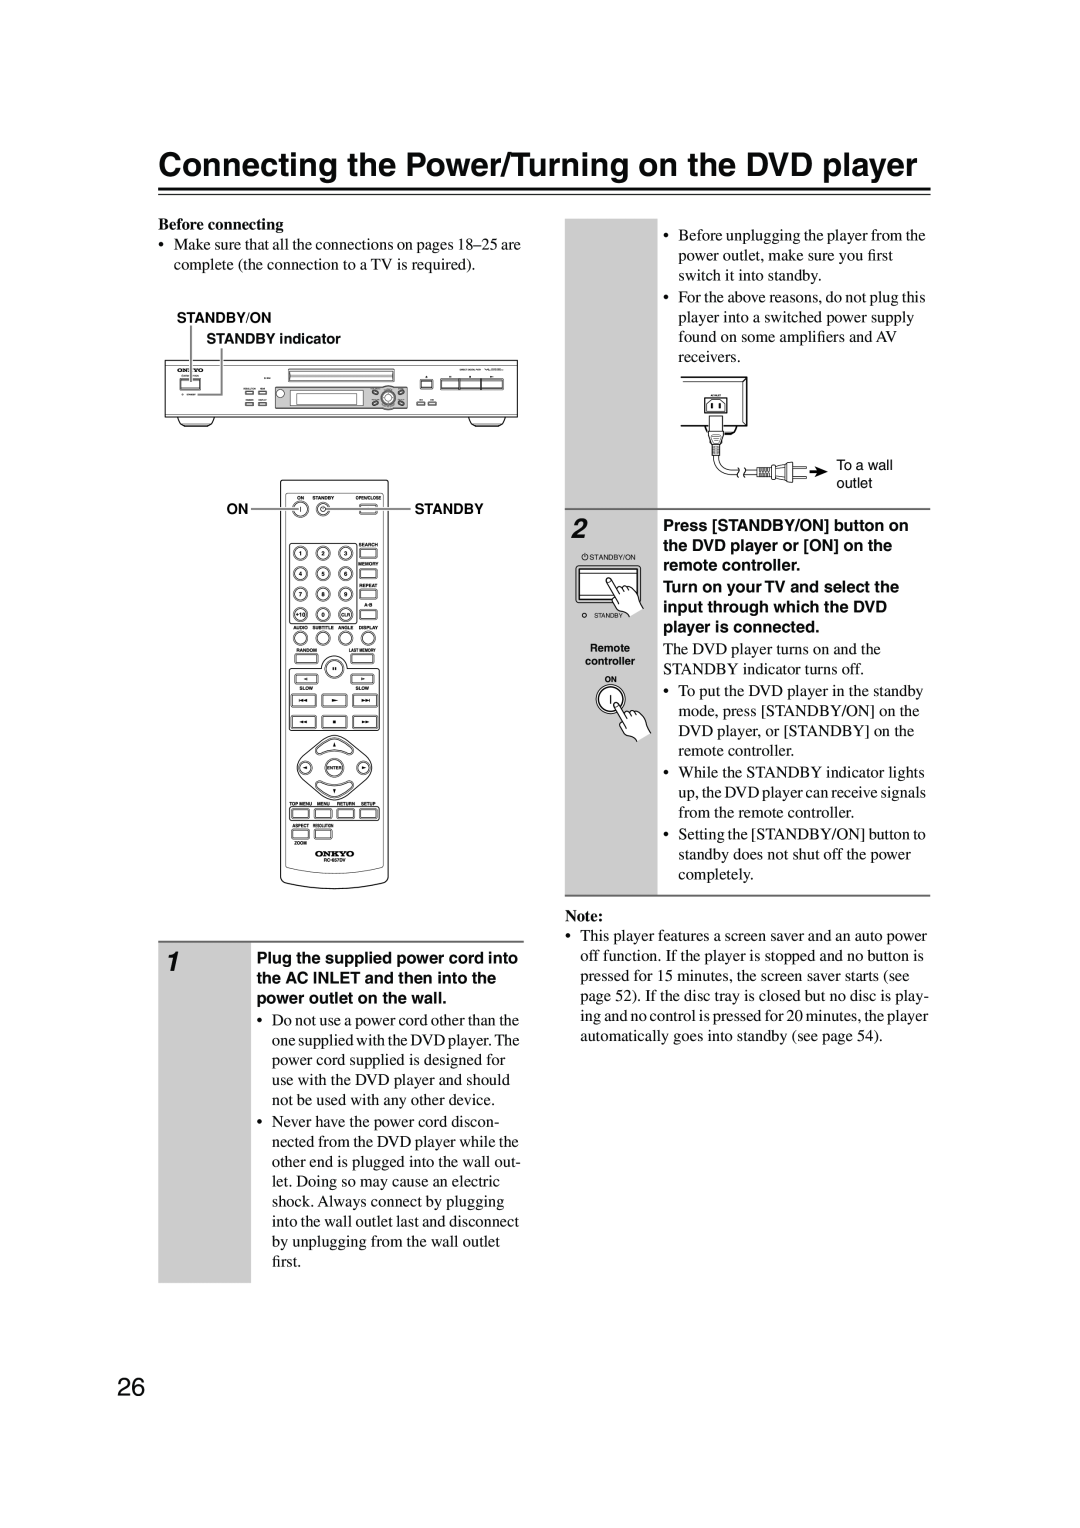 Onkyo DV-SP504E instruction manual Connecting the Power/Turning on the DVD player, Before connecting 